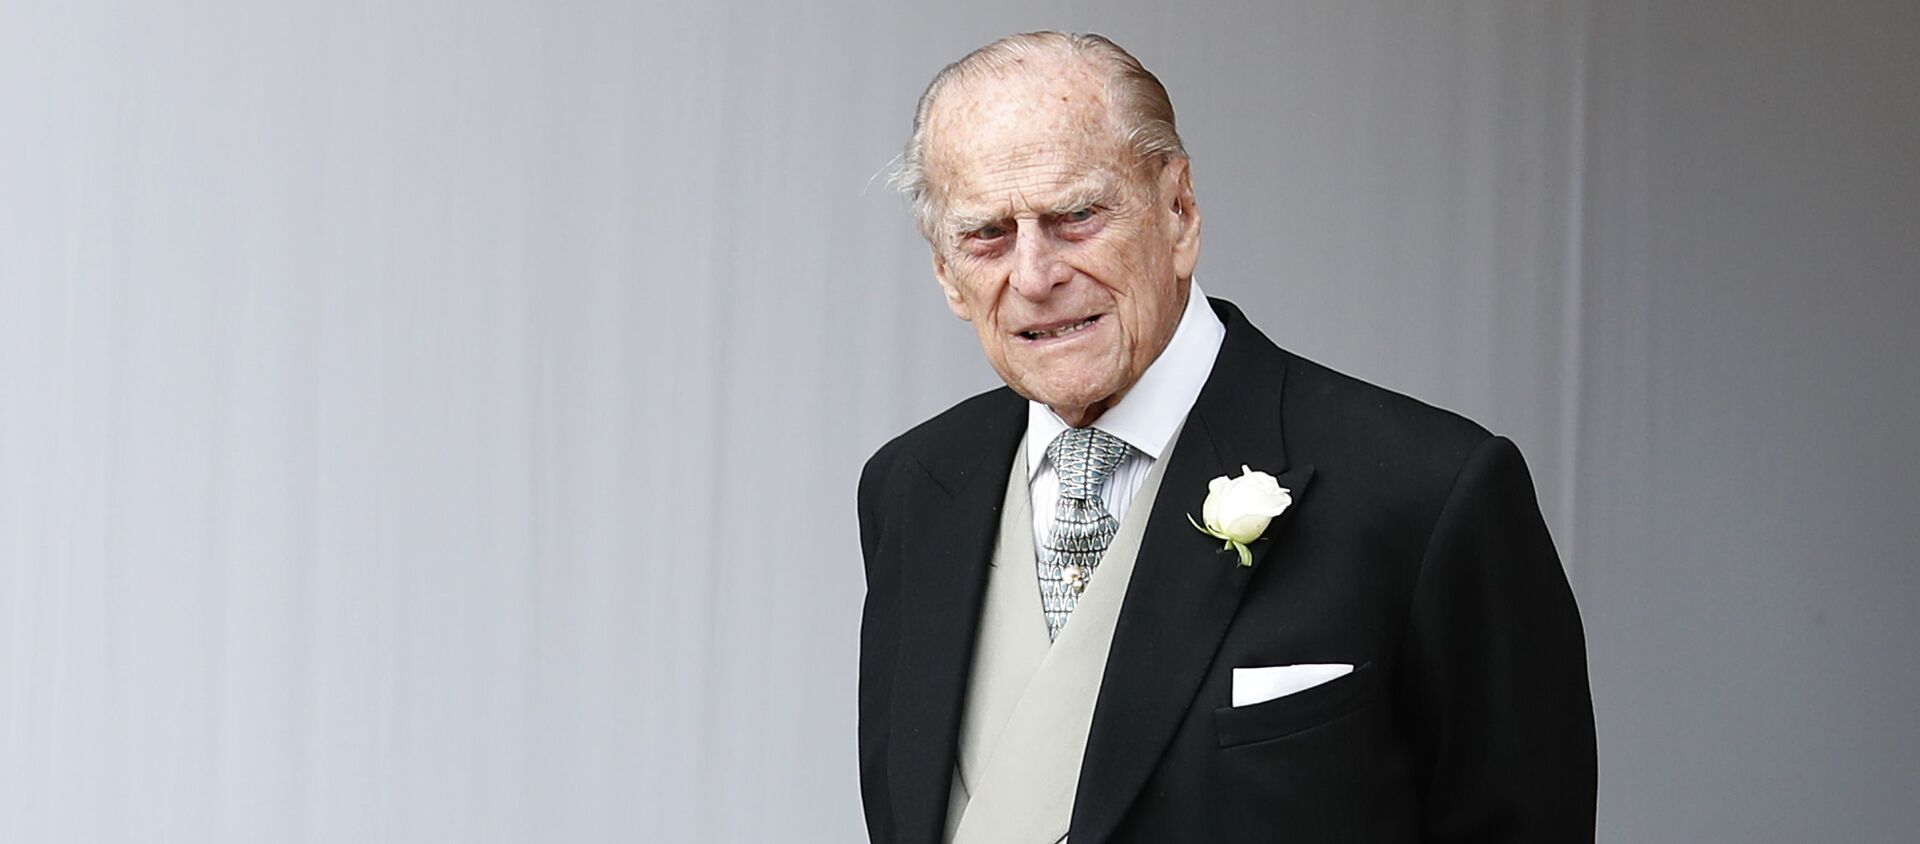 Britain's Prince Philip waits for the bridal procession following the wedding of Princess Eugenie of York and Jack Brooksbank in St George's Chapel, Windsor Castle, near London, England, Friday, Oct. 12, 2018 - Sputnik International, 1920, 09.04.2021